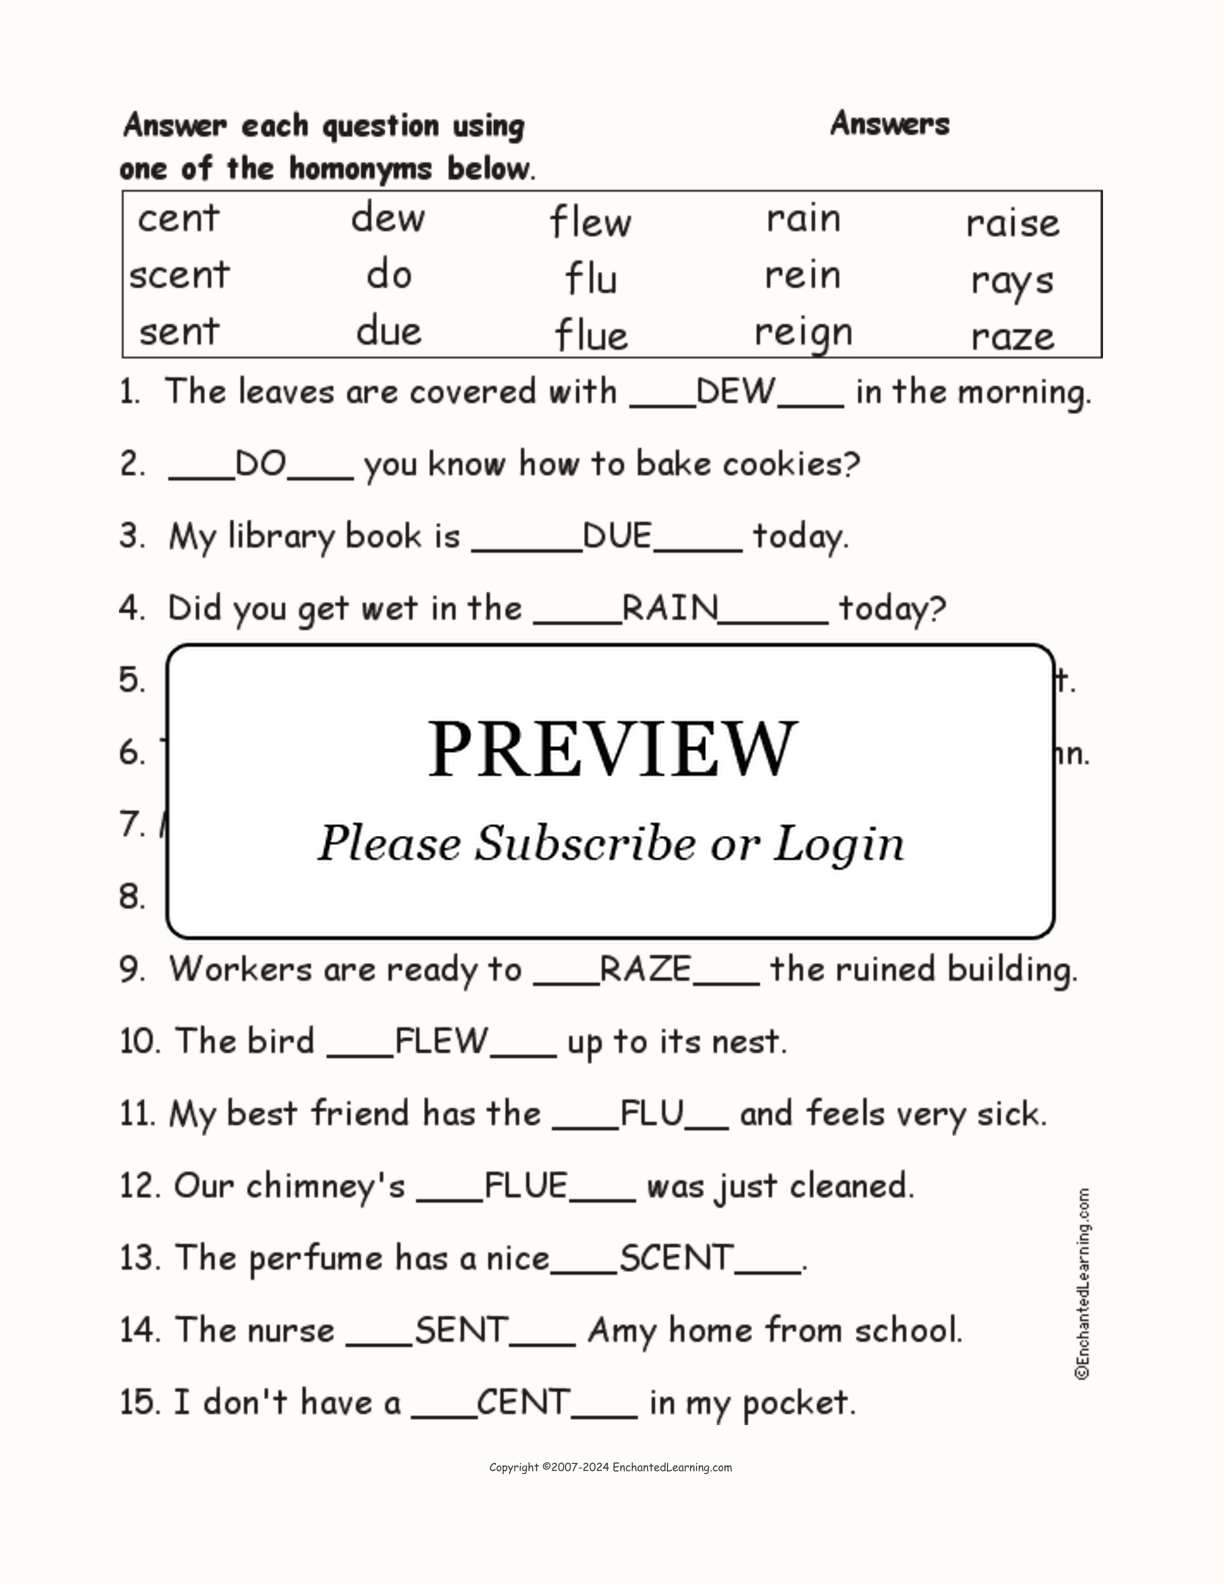 Homonyms Spelling Word Questions #2 interactive worksheet page 2